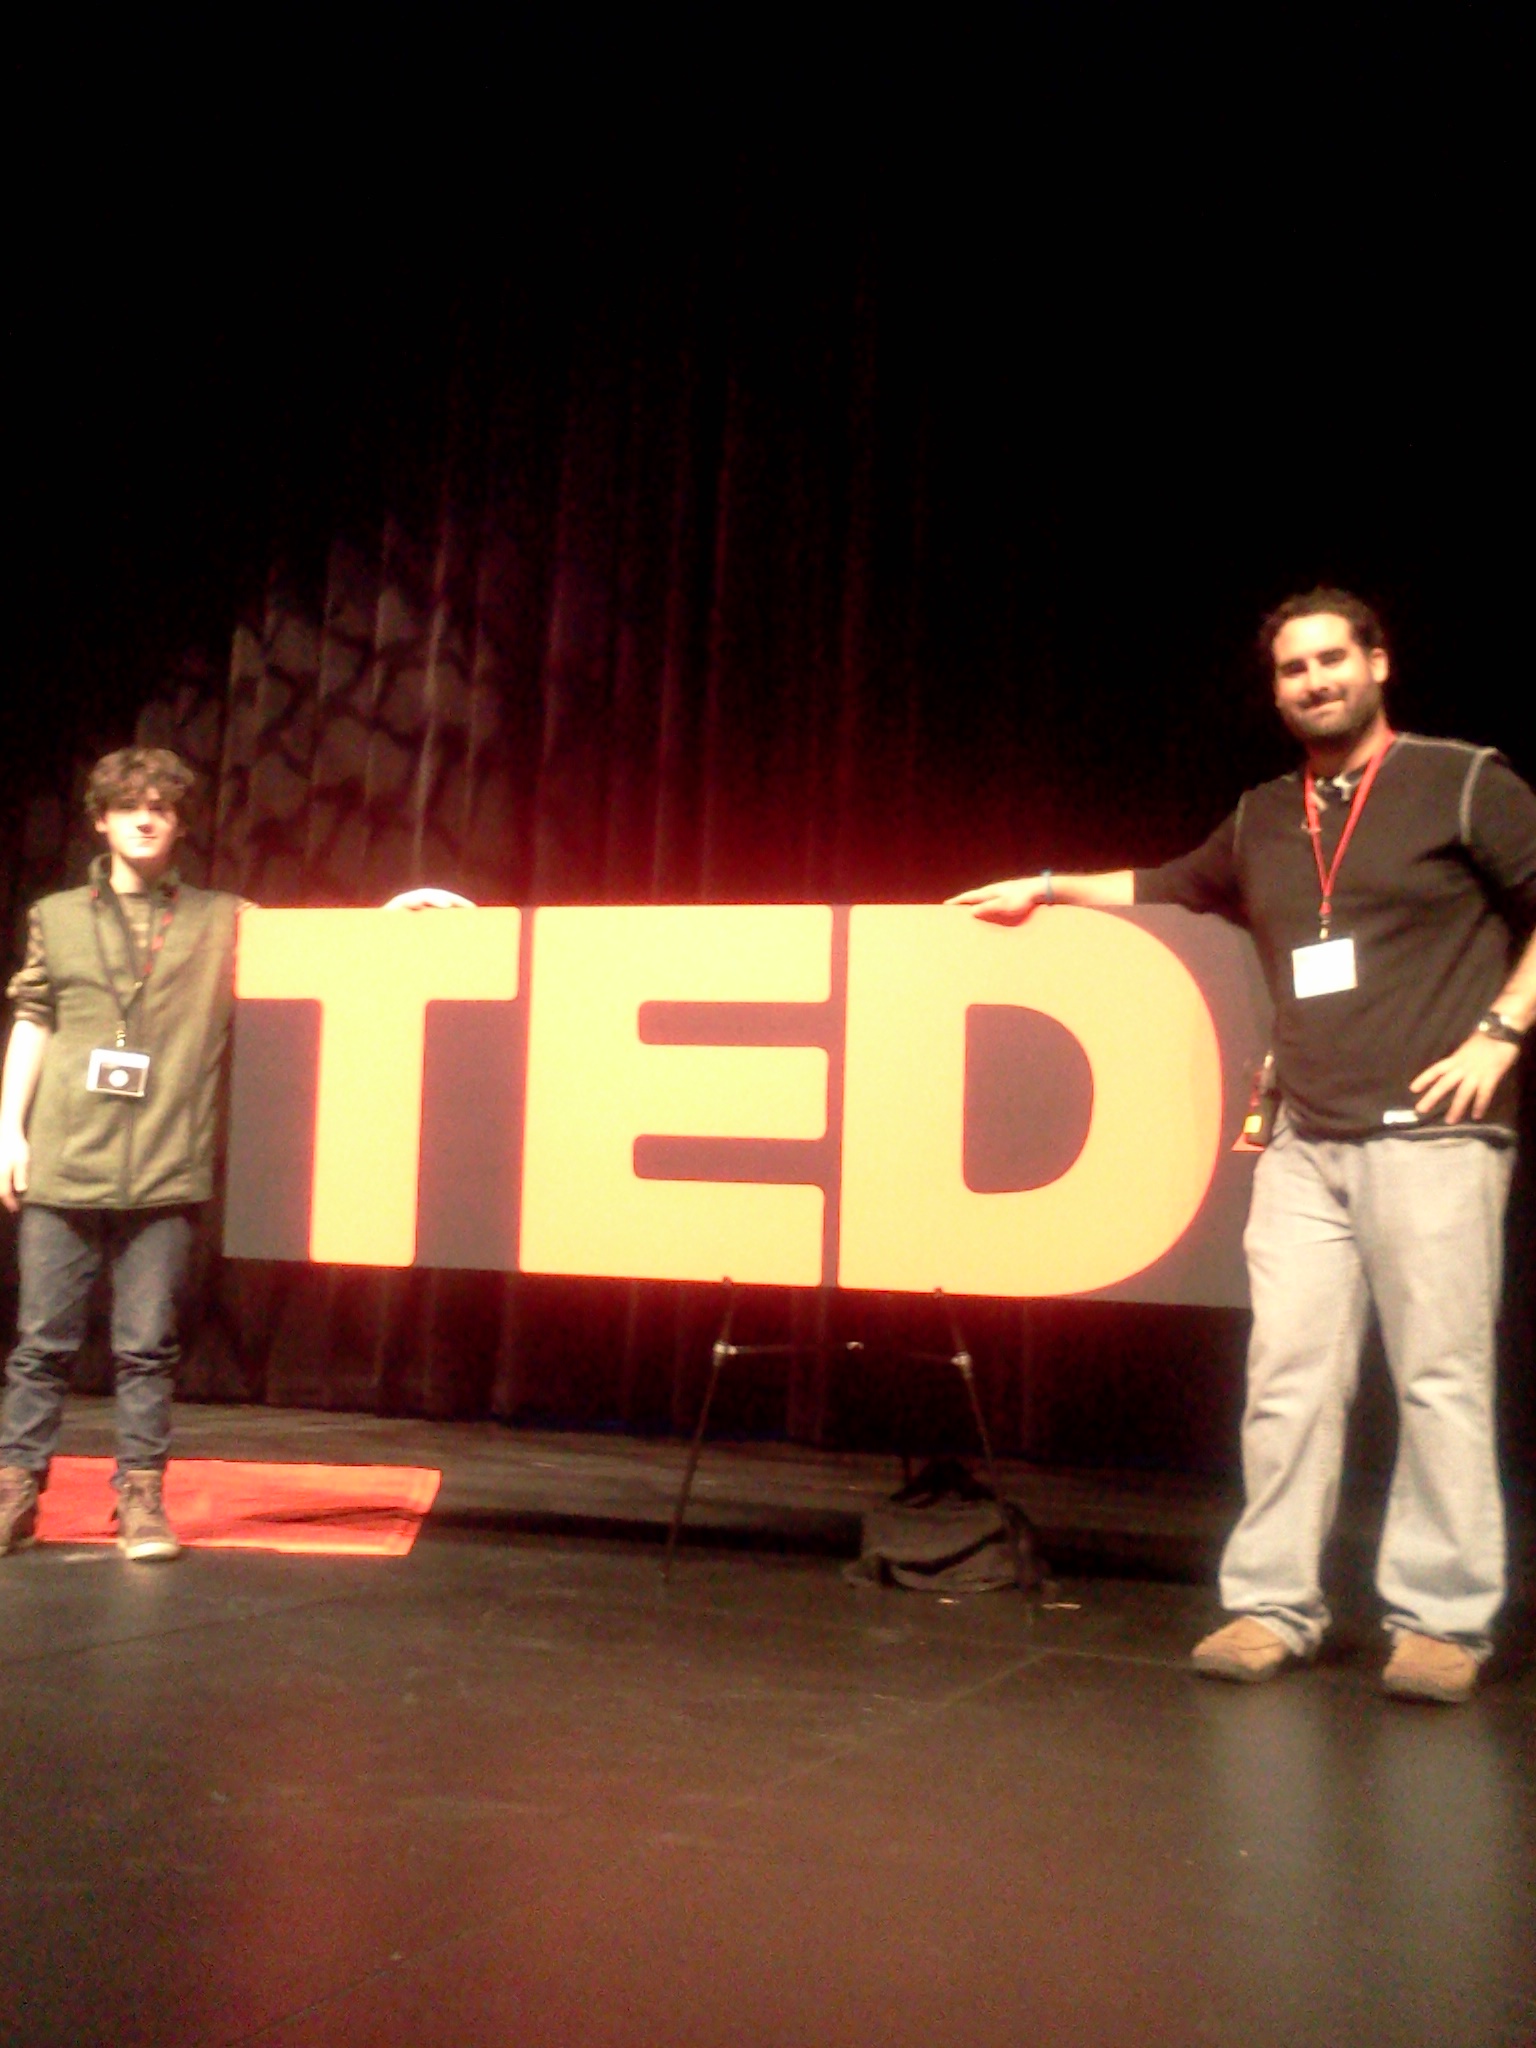 William Leon with Eric Espinosa (producer of TED event) at a TED event